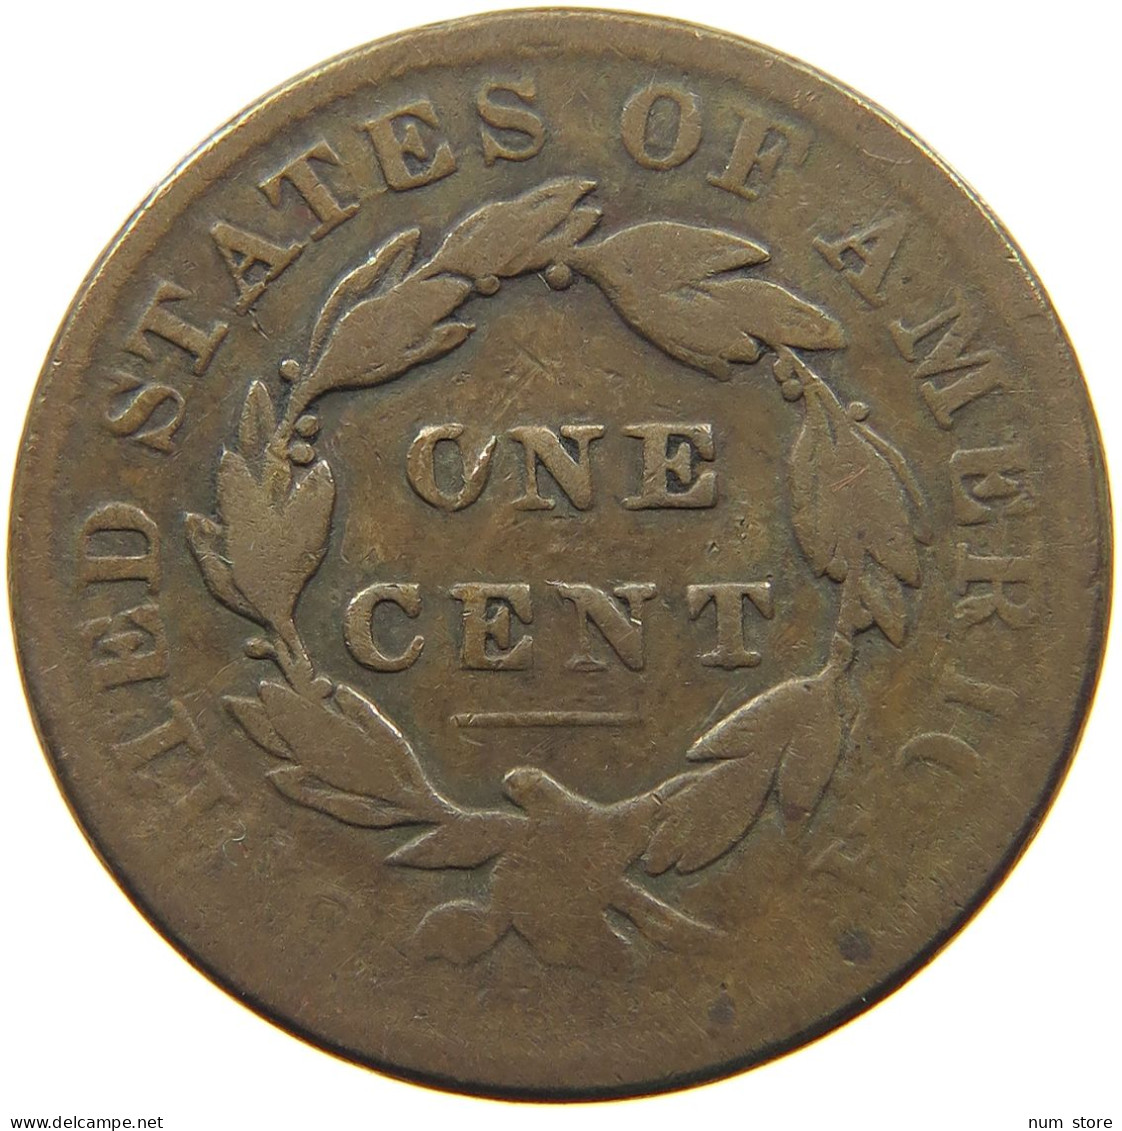 UNITED STATES OF AMERICA LARGE CENT 1834 CORONET HEAD #t141 0281 - 1816-1839: Coronet Head (Tête Couronnée)